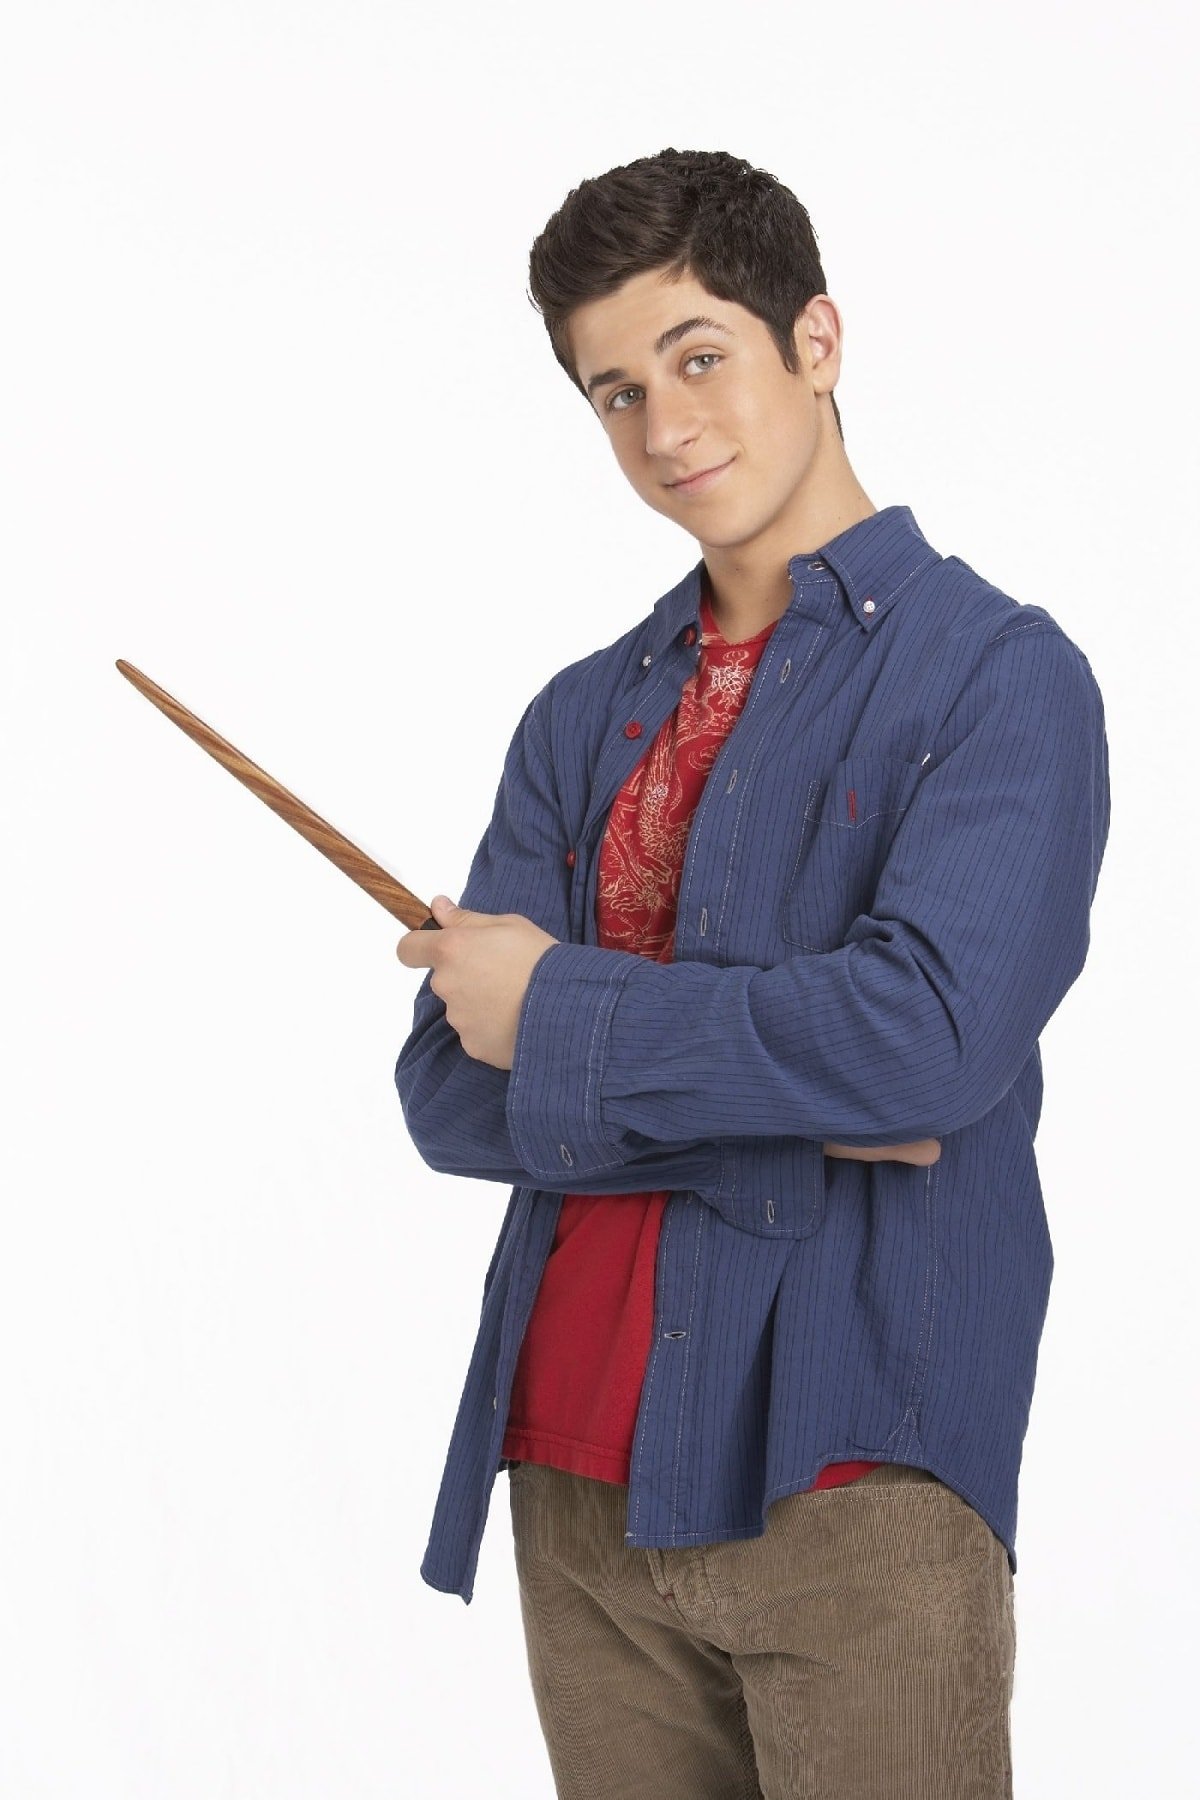 Promo shot of David Henrie as Justin Russo in the fantasy teen sitcom Wizards of Waverly Place